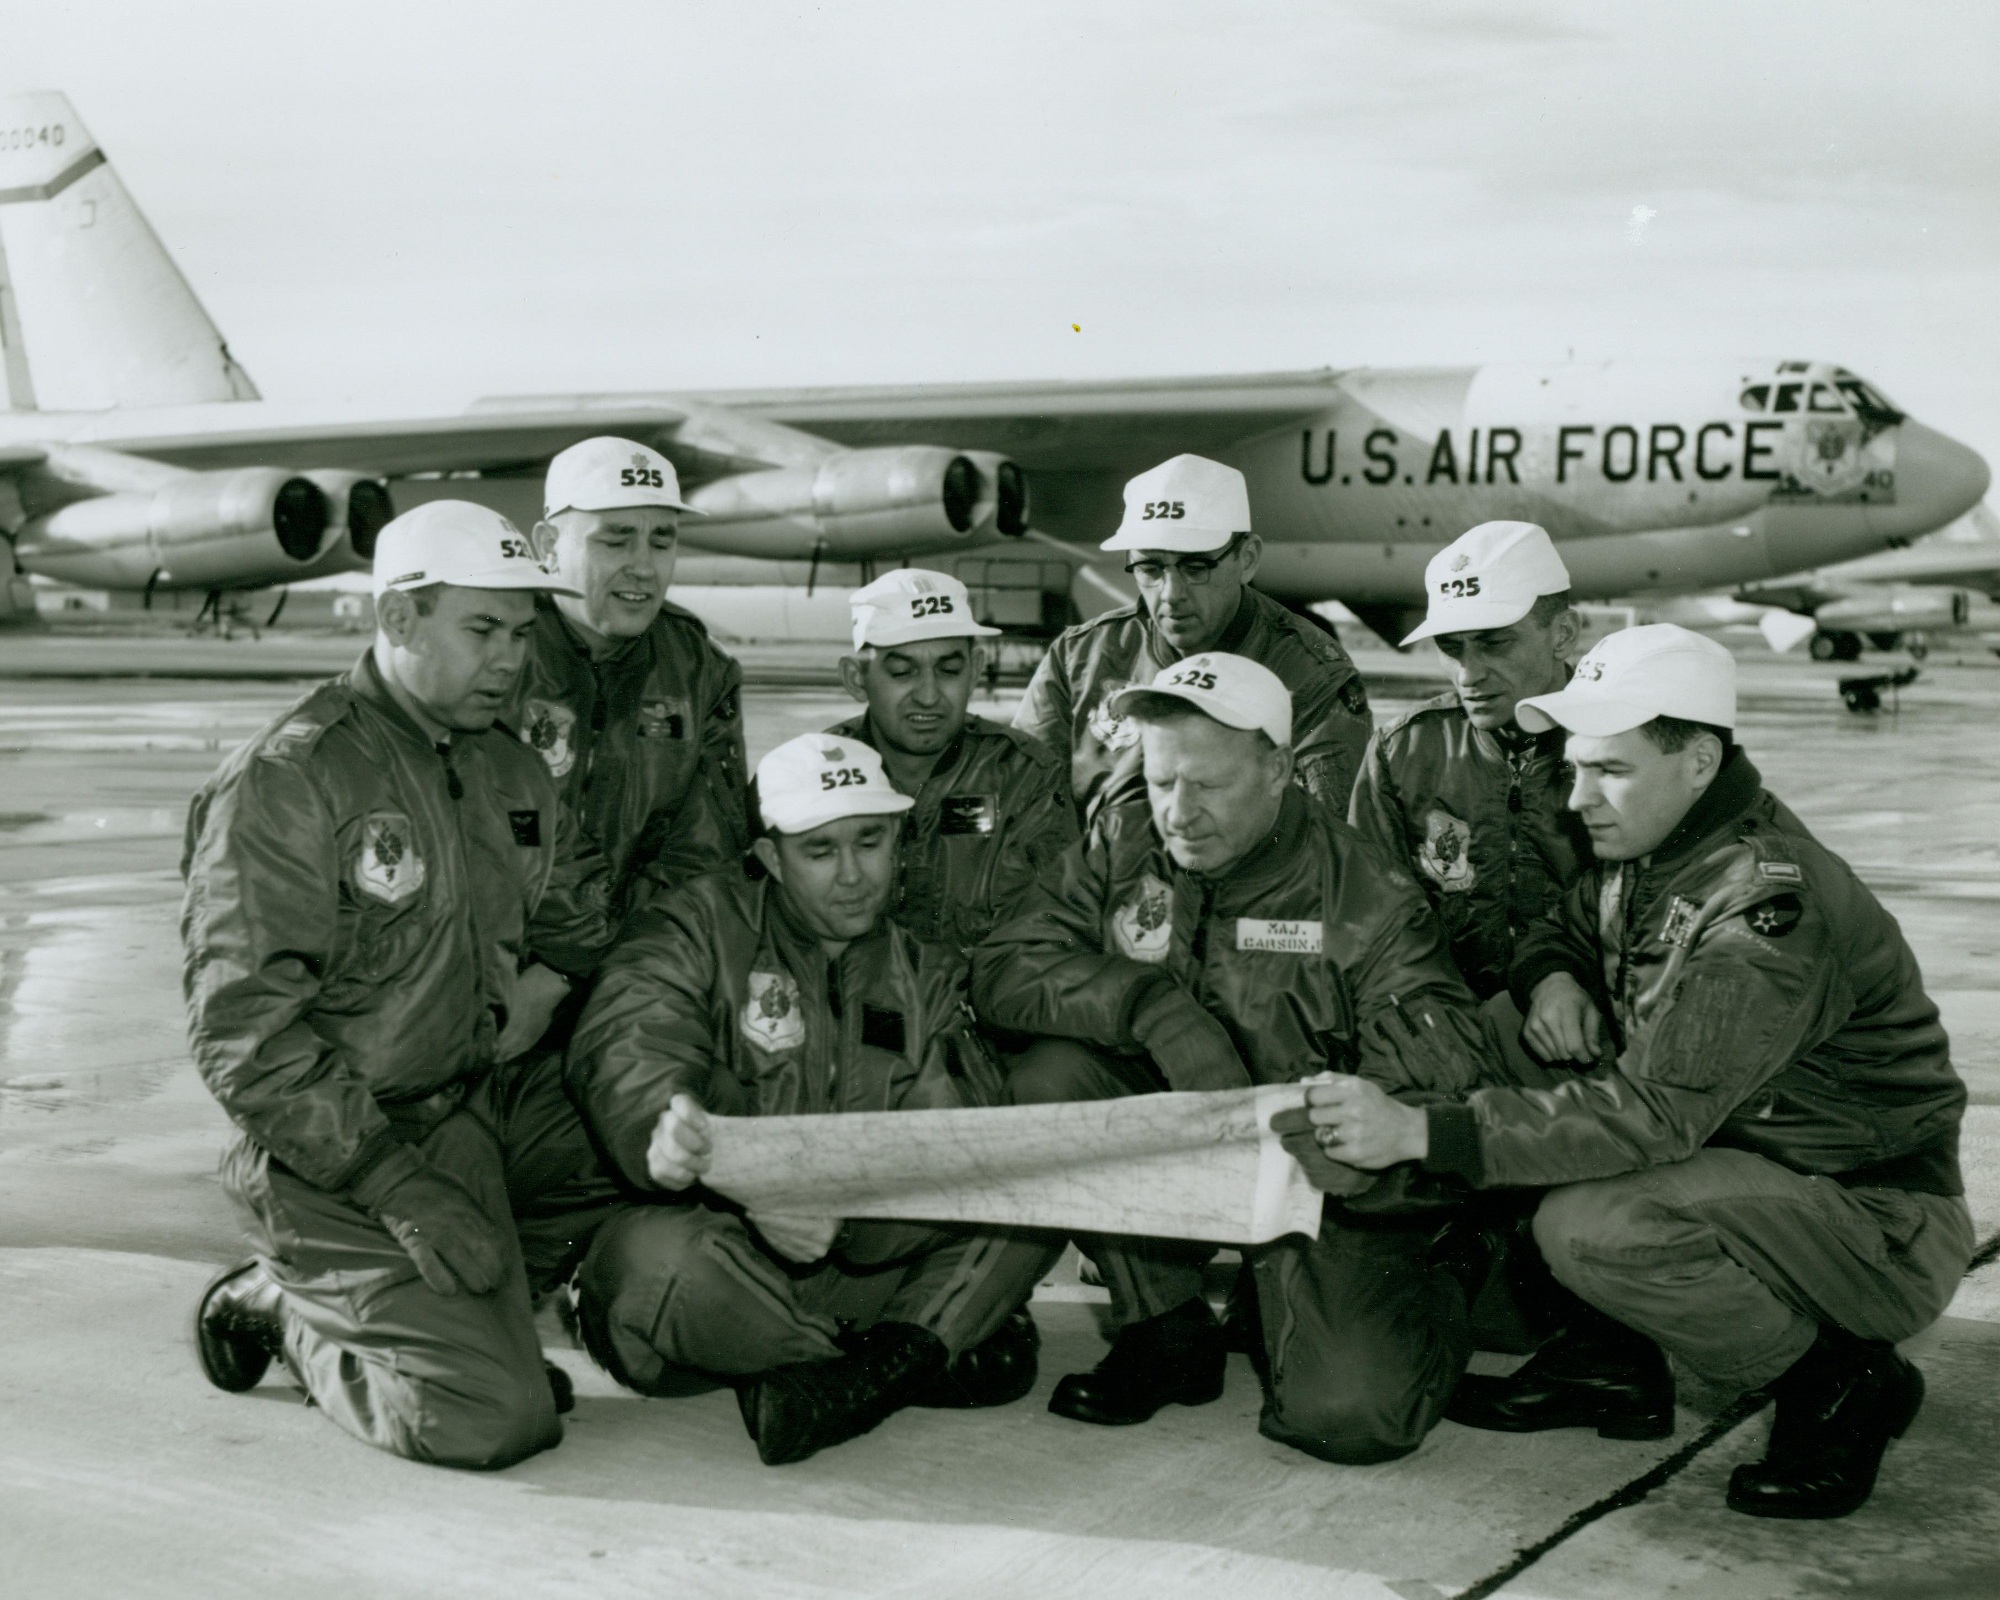 Colonel Clyde P. Evely, USAF with the crew of the record-setting B-52H Stratofortress 60-0040. (U.S. Air Force)